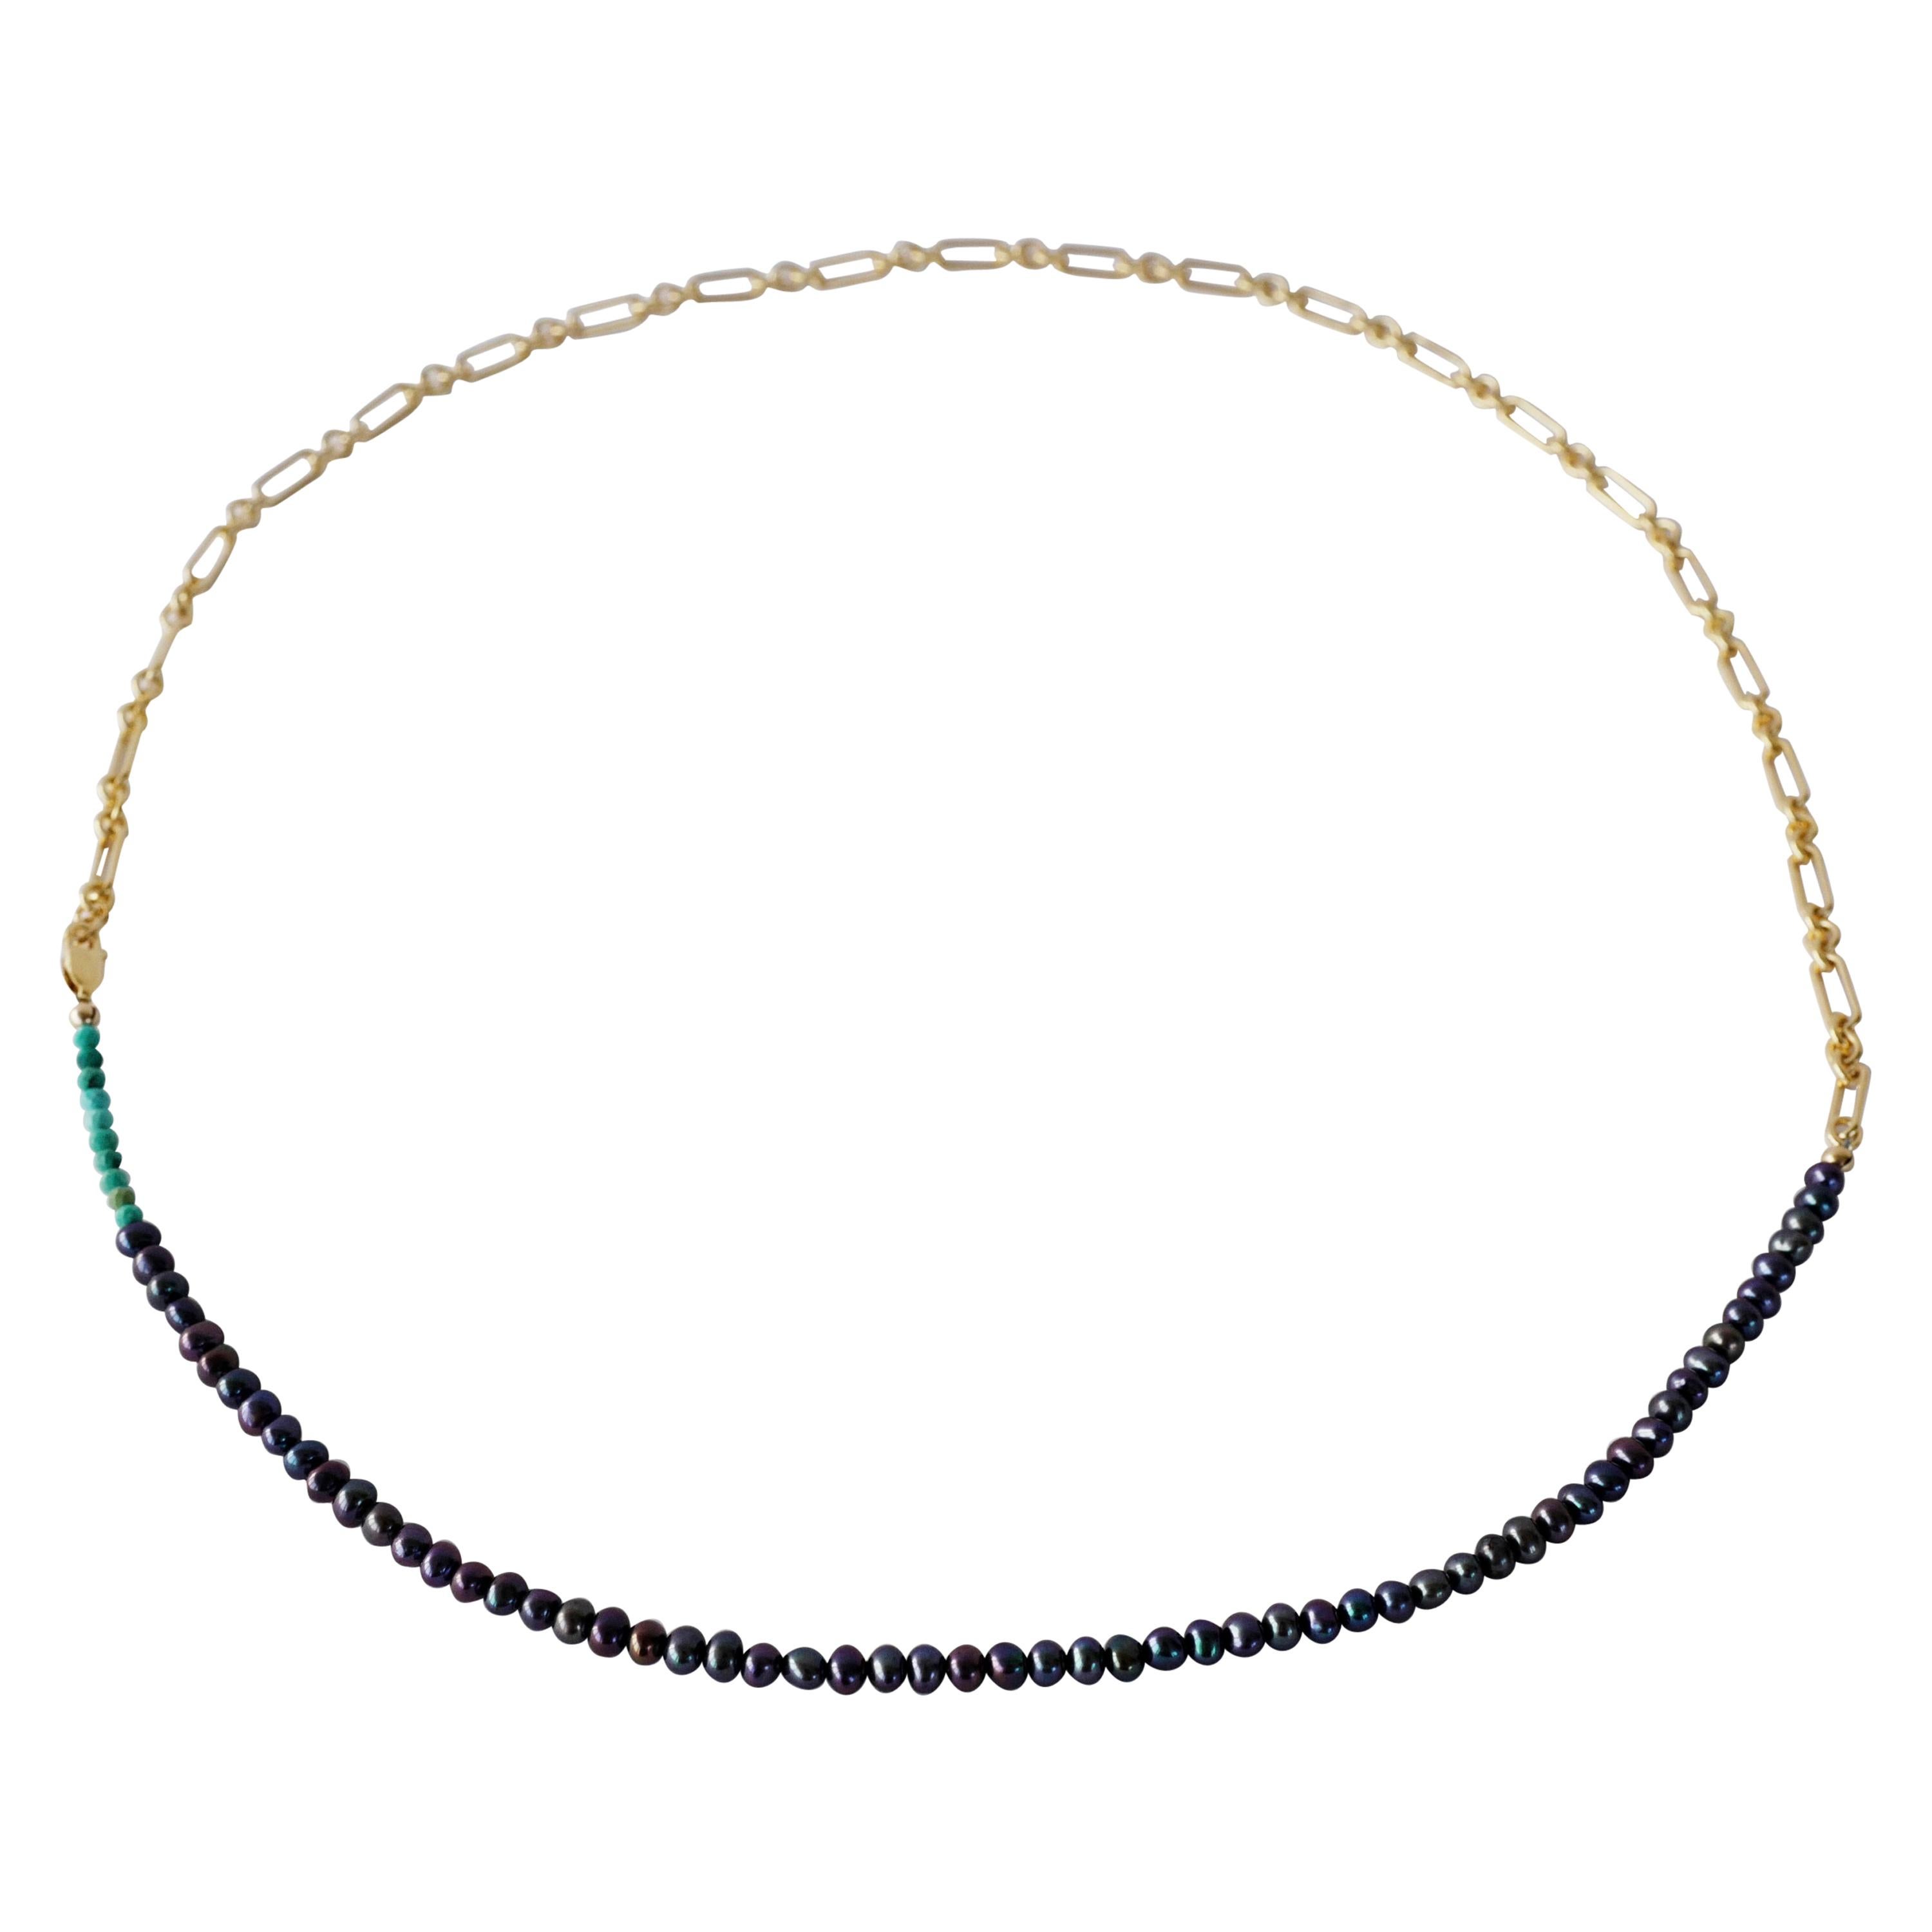 Black Pearl Turquoise Gold Filled Chain Beaded Choker Necklace J Dauphin